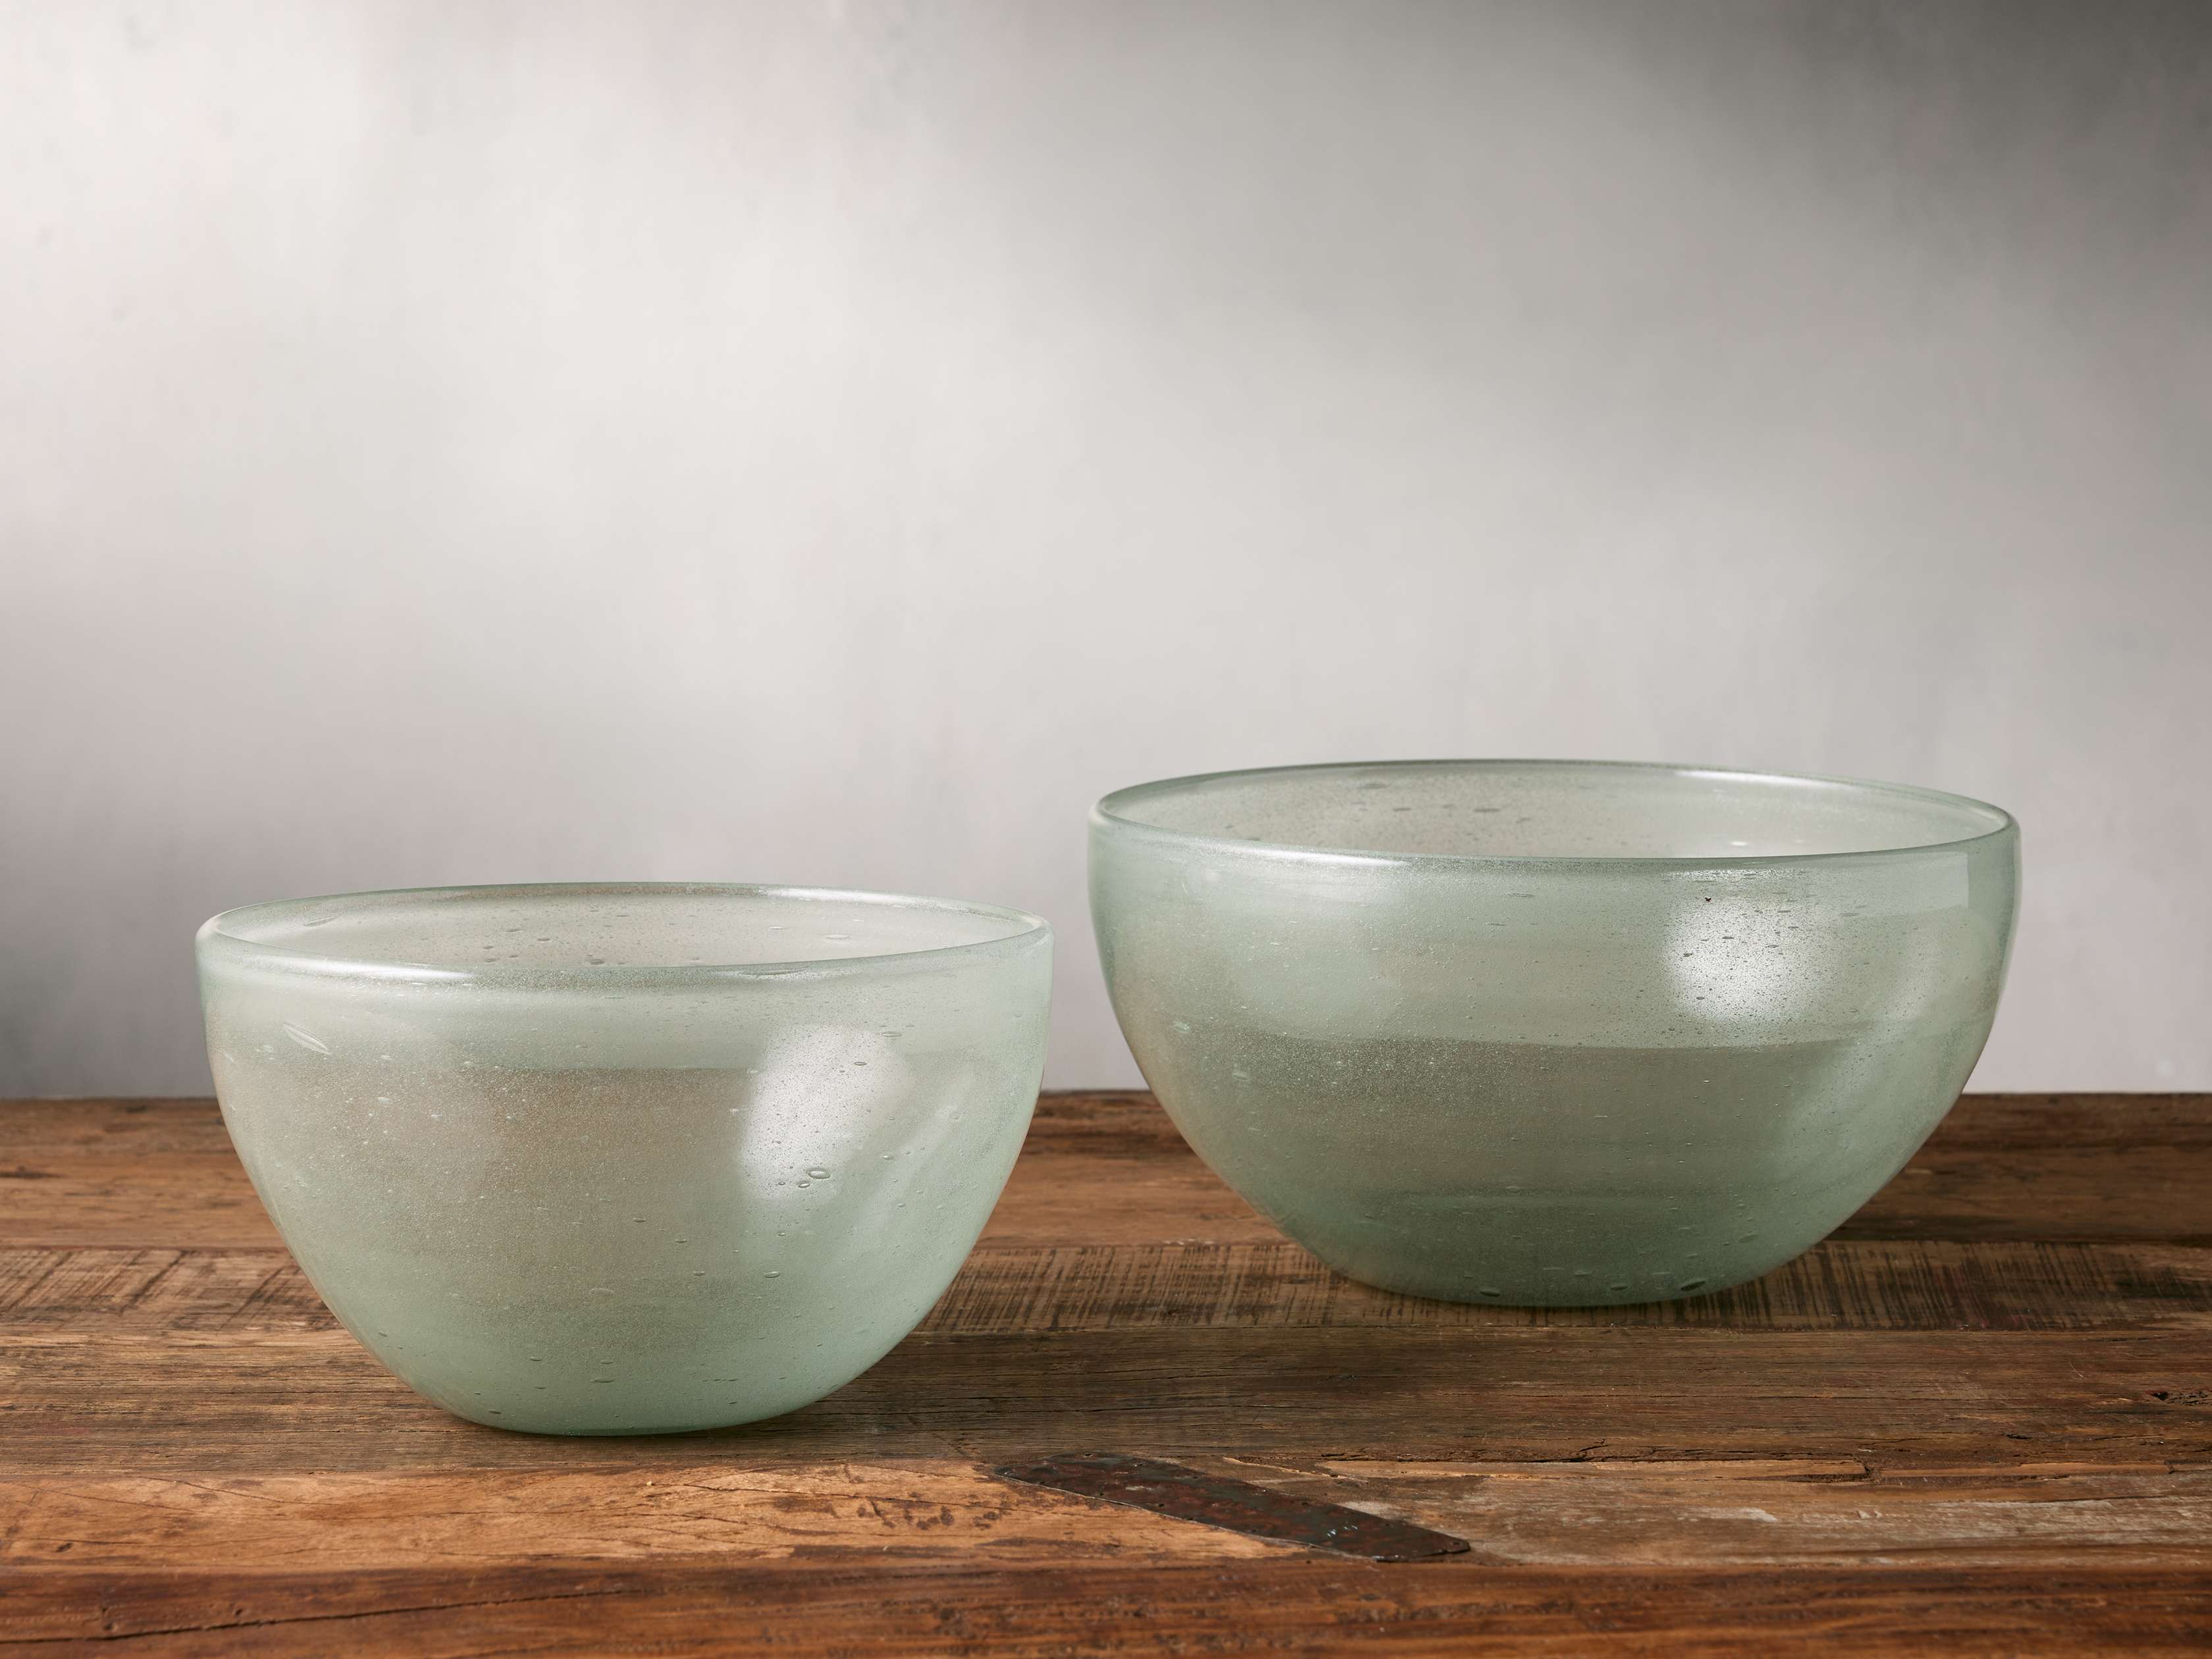 Clear Mixing Bowls (Set of 2)